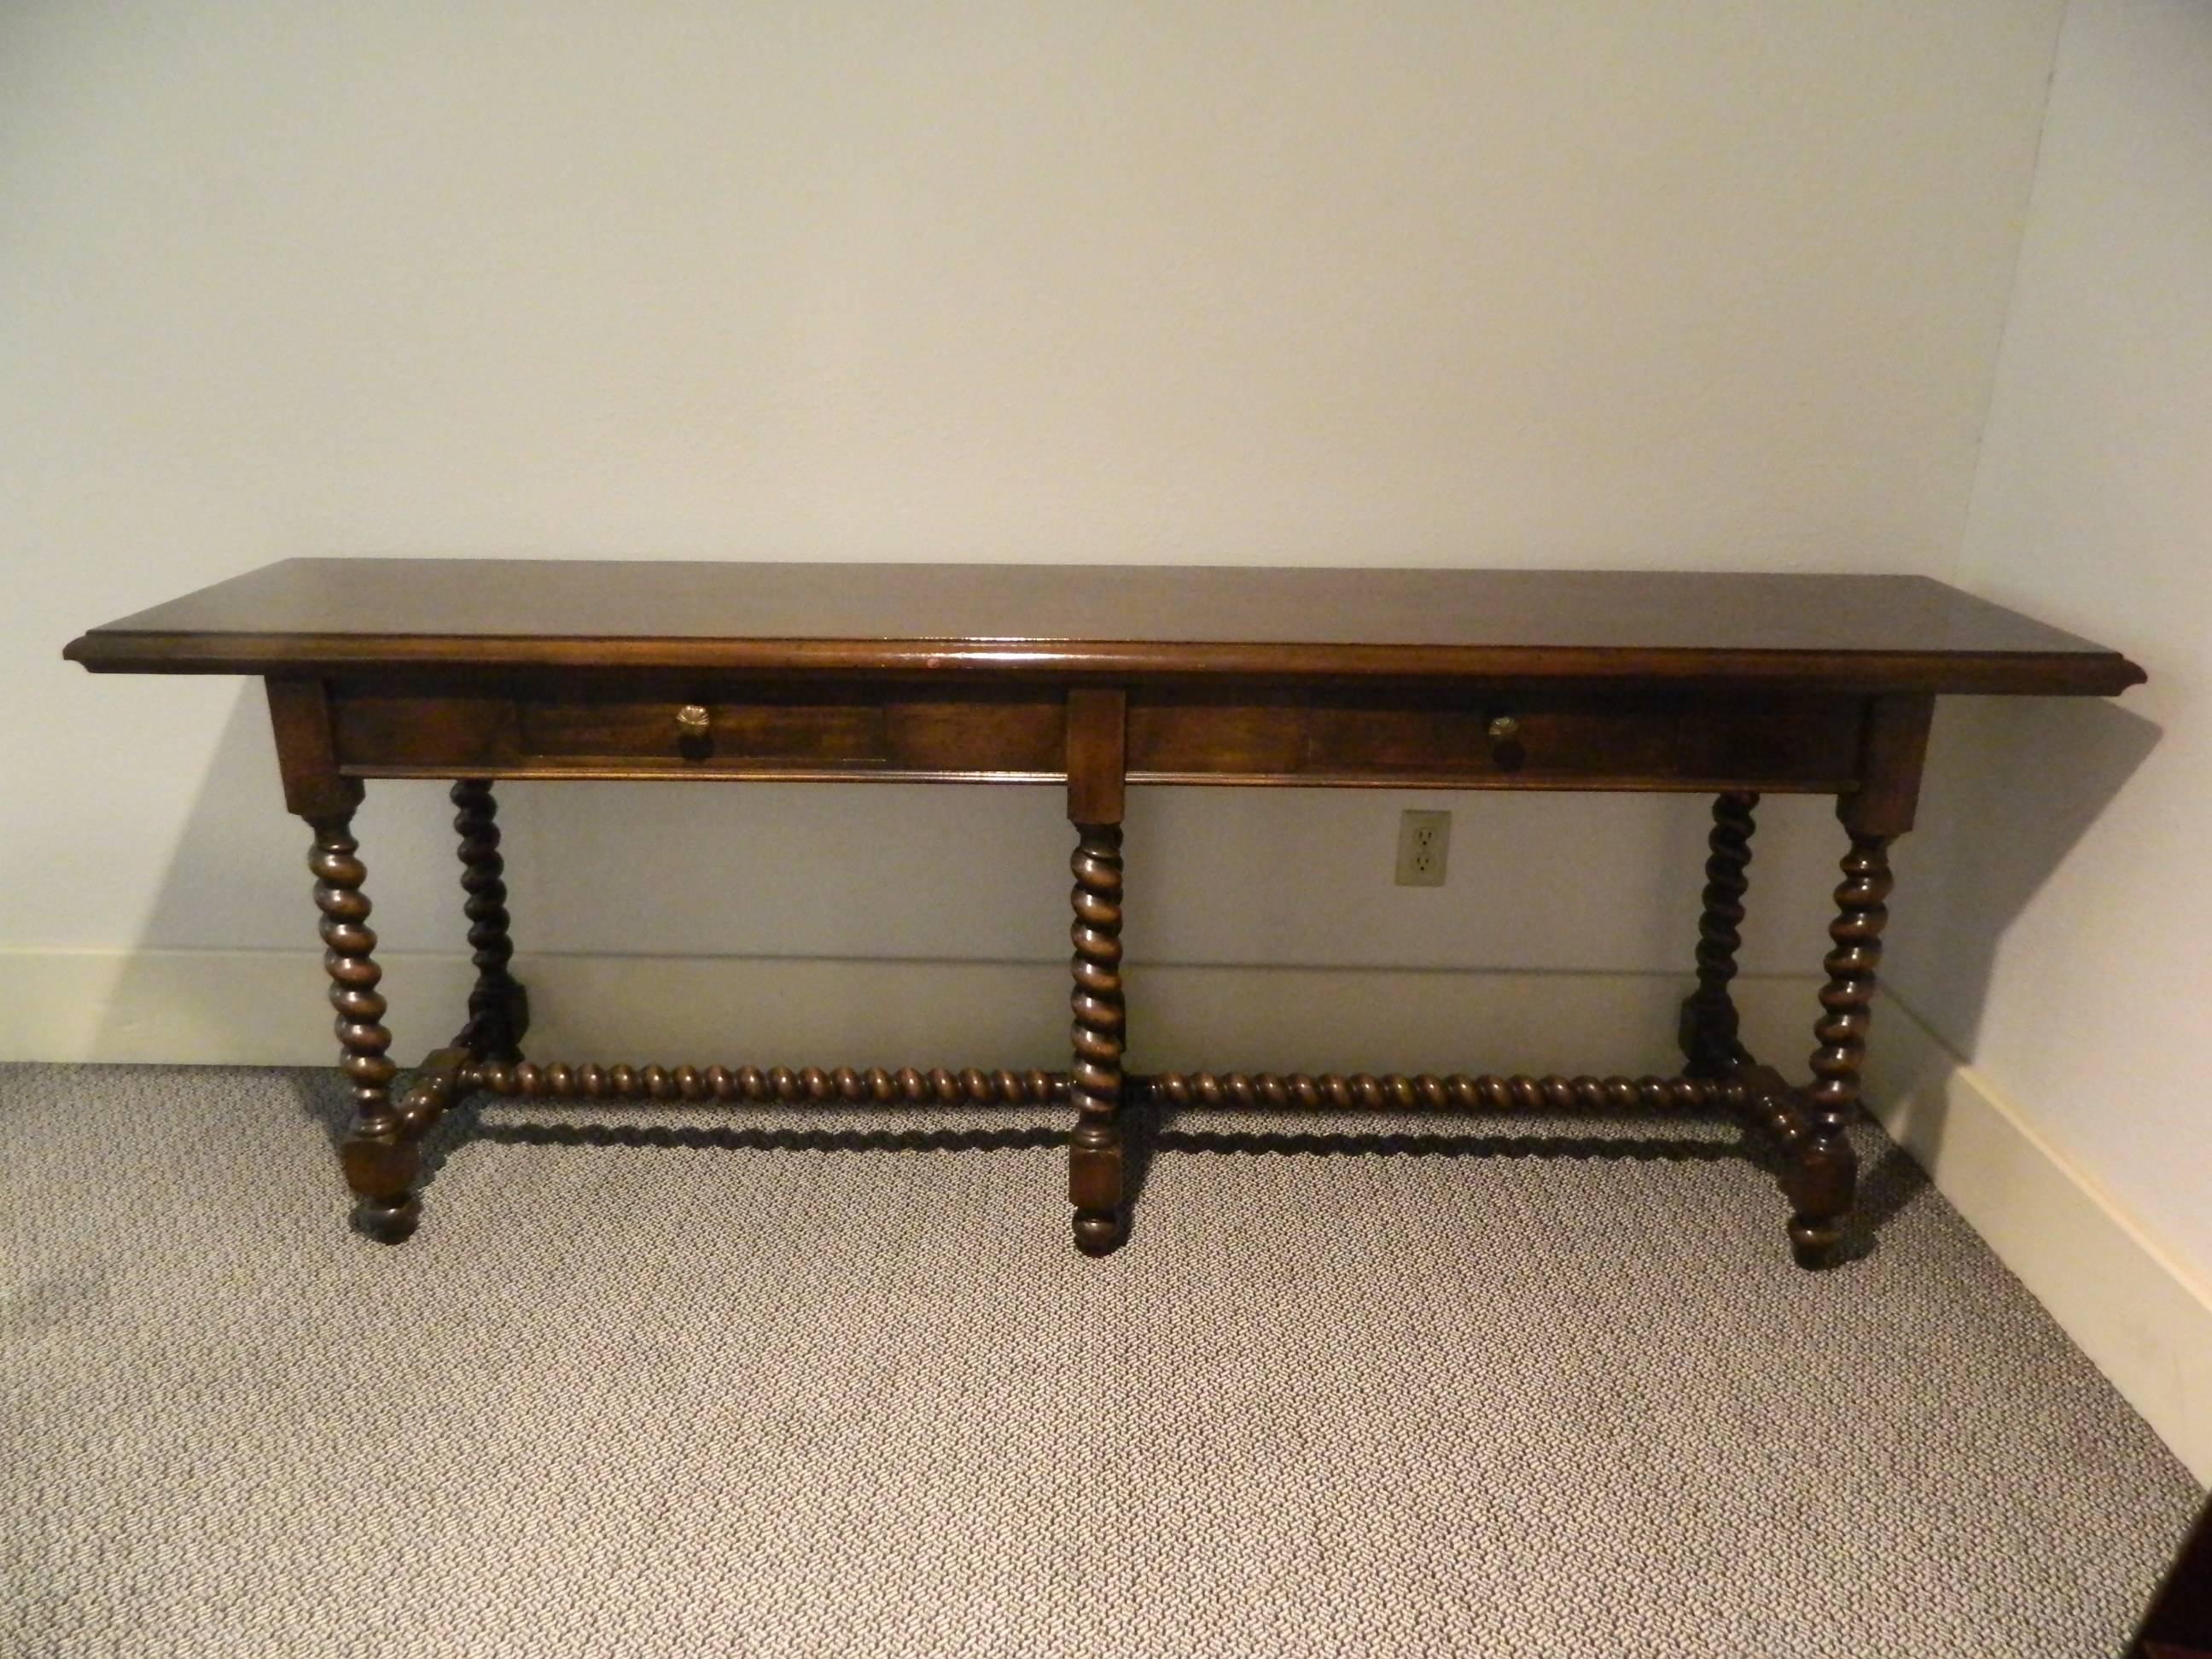 English walnut console or serving table with barley twist legs and stretcher, 19th century.
 